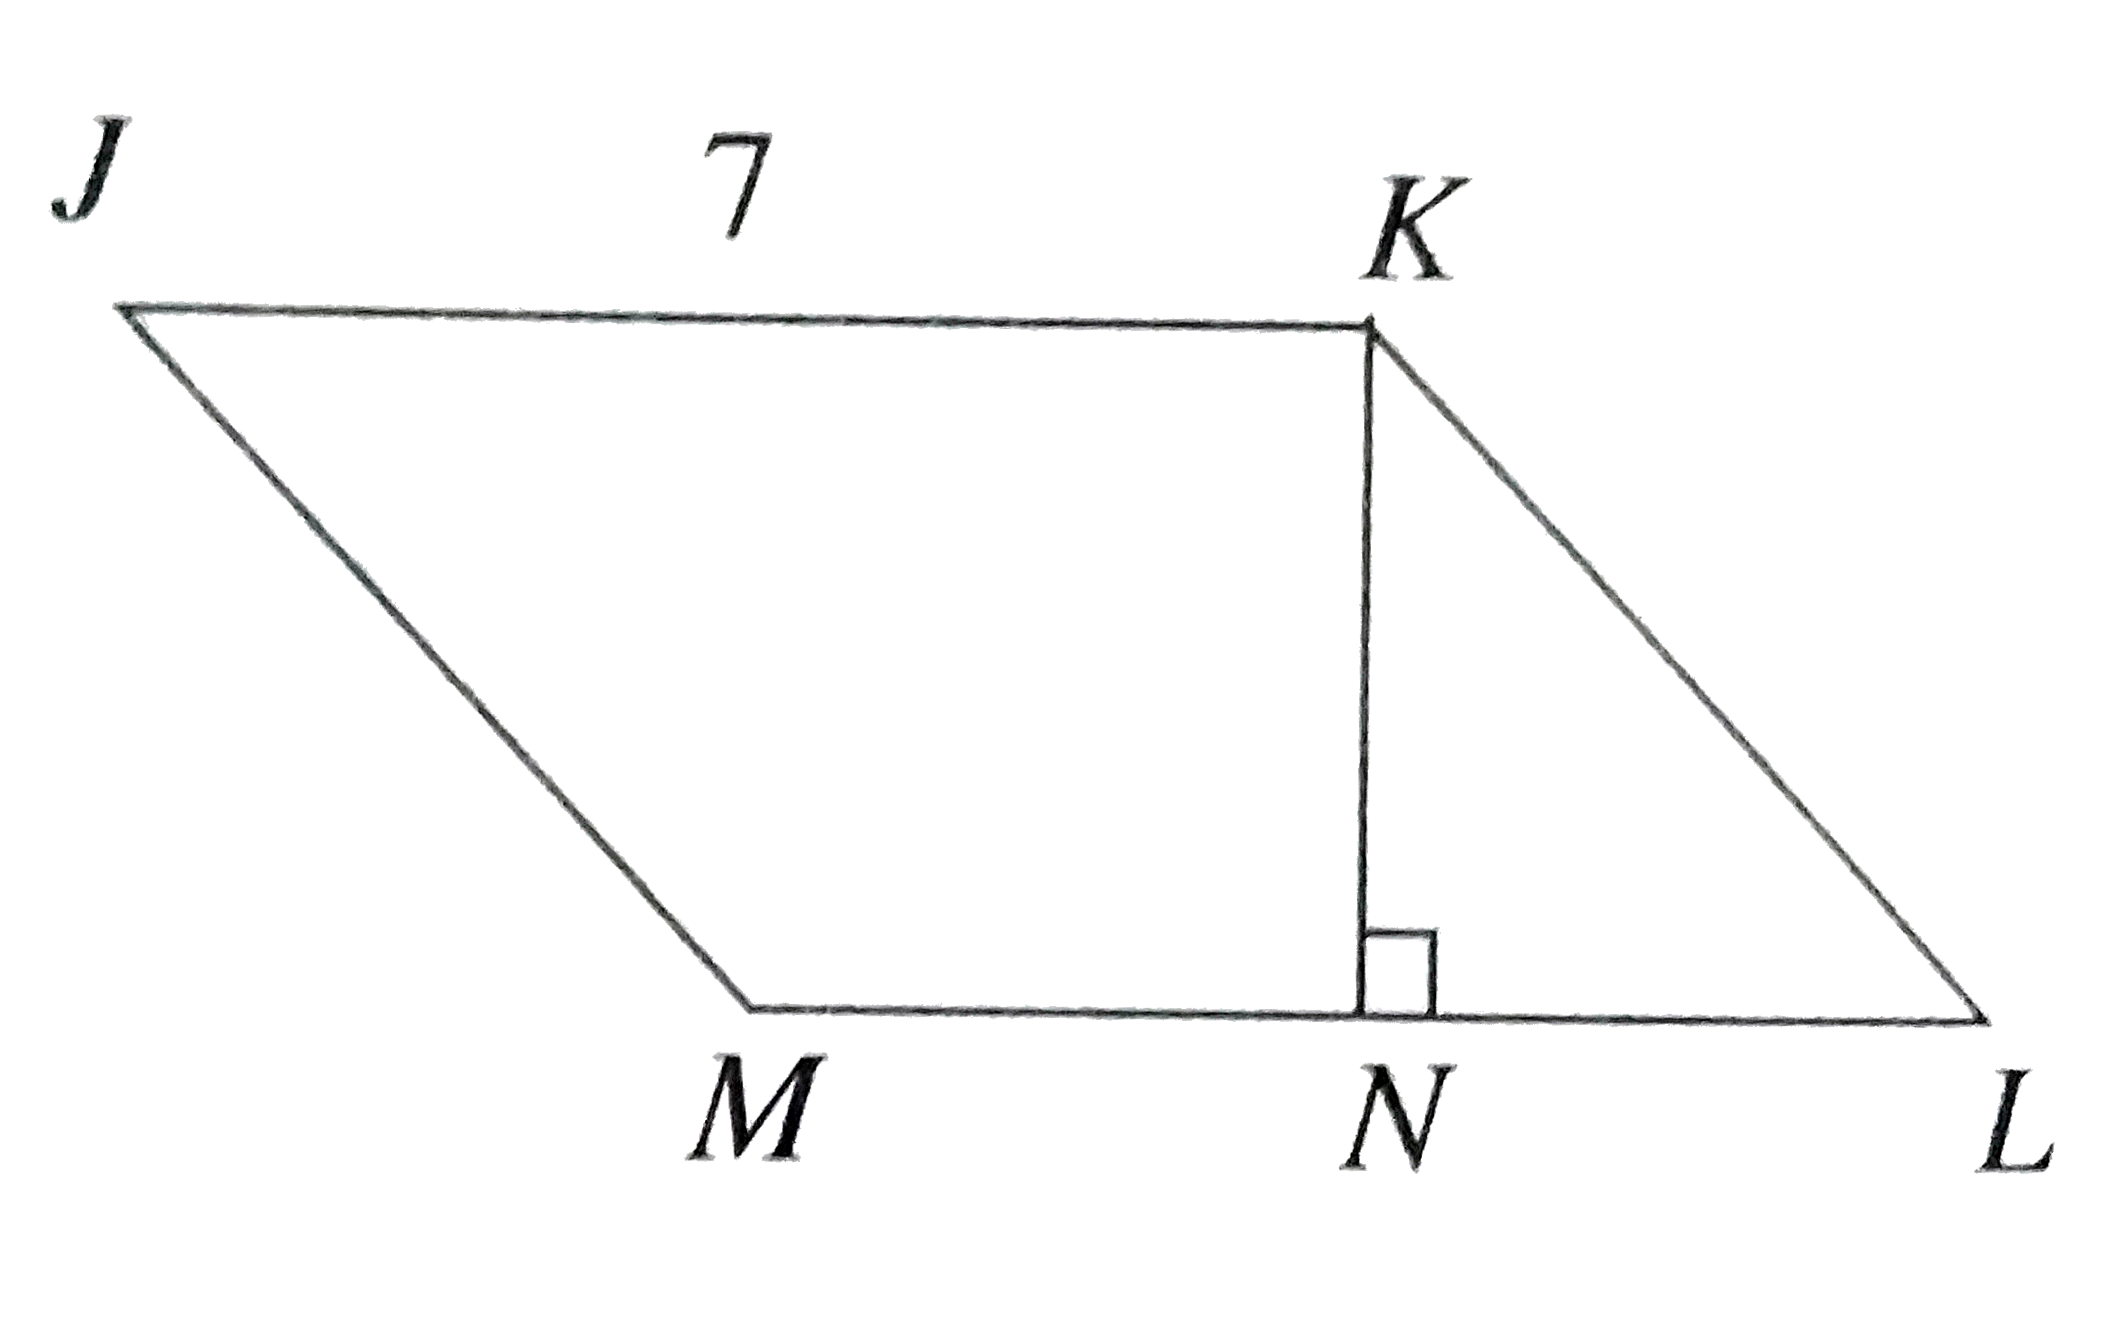 The area of parallelogram JKLM is 28 bar(JK)=7. If bar(KN) is perpendicular to bar(ML) and if N is the midpoint of bar(ML), what is the perimeter of JKLM ?